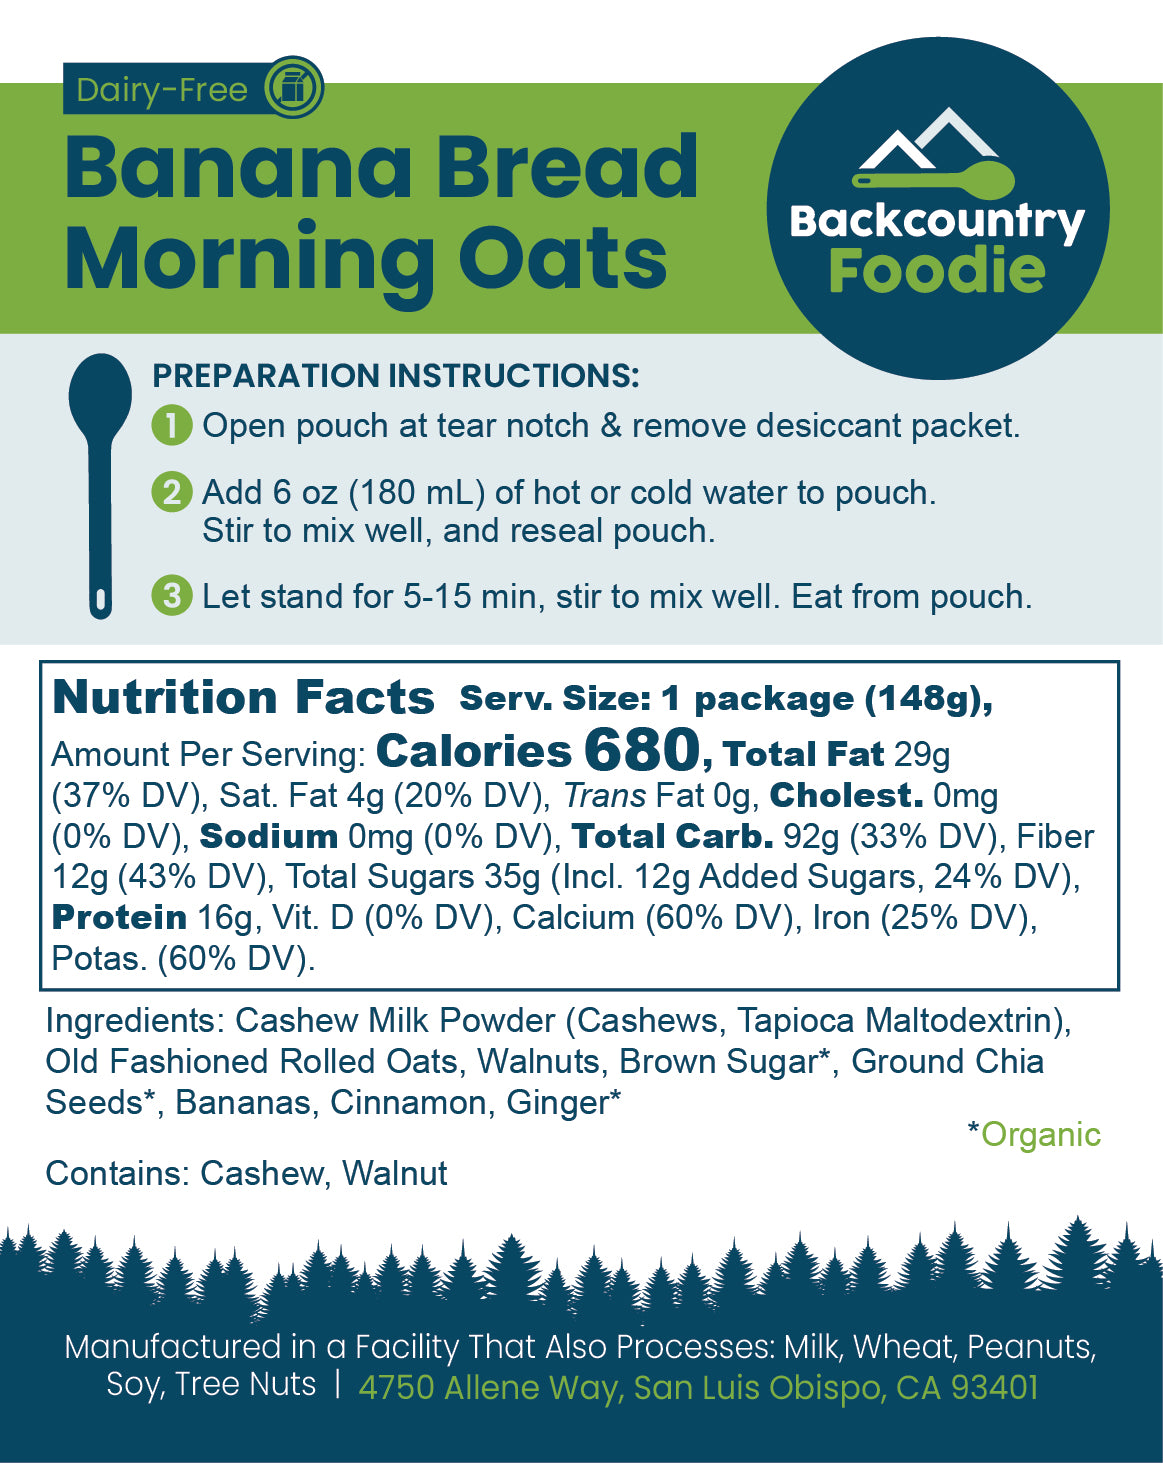 Backcountry Foodie - Banana Bread Morning Oats, Dairy-Free